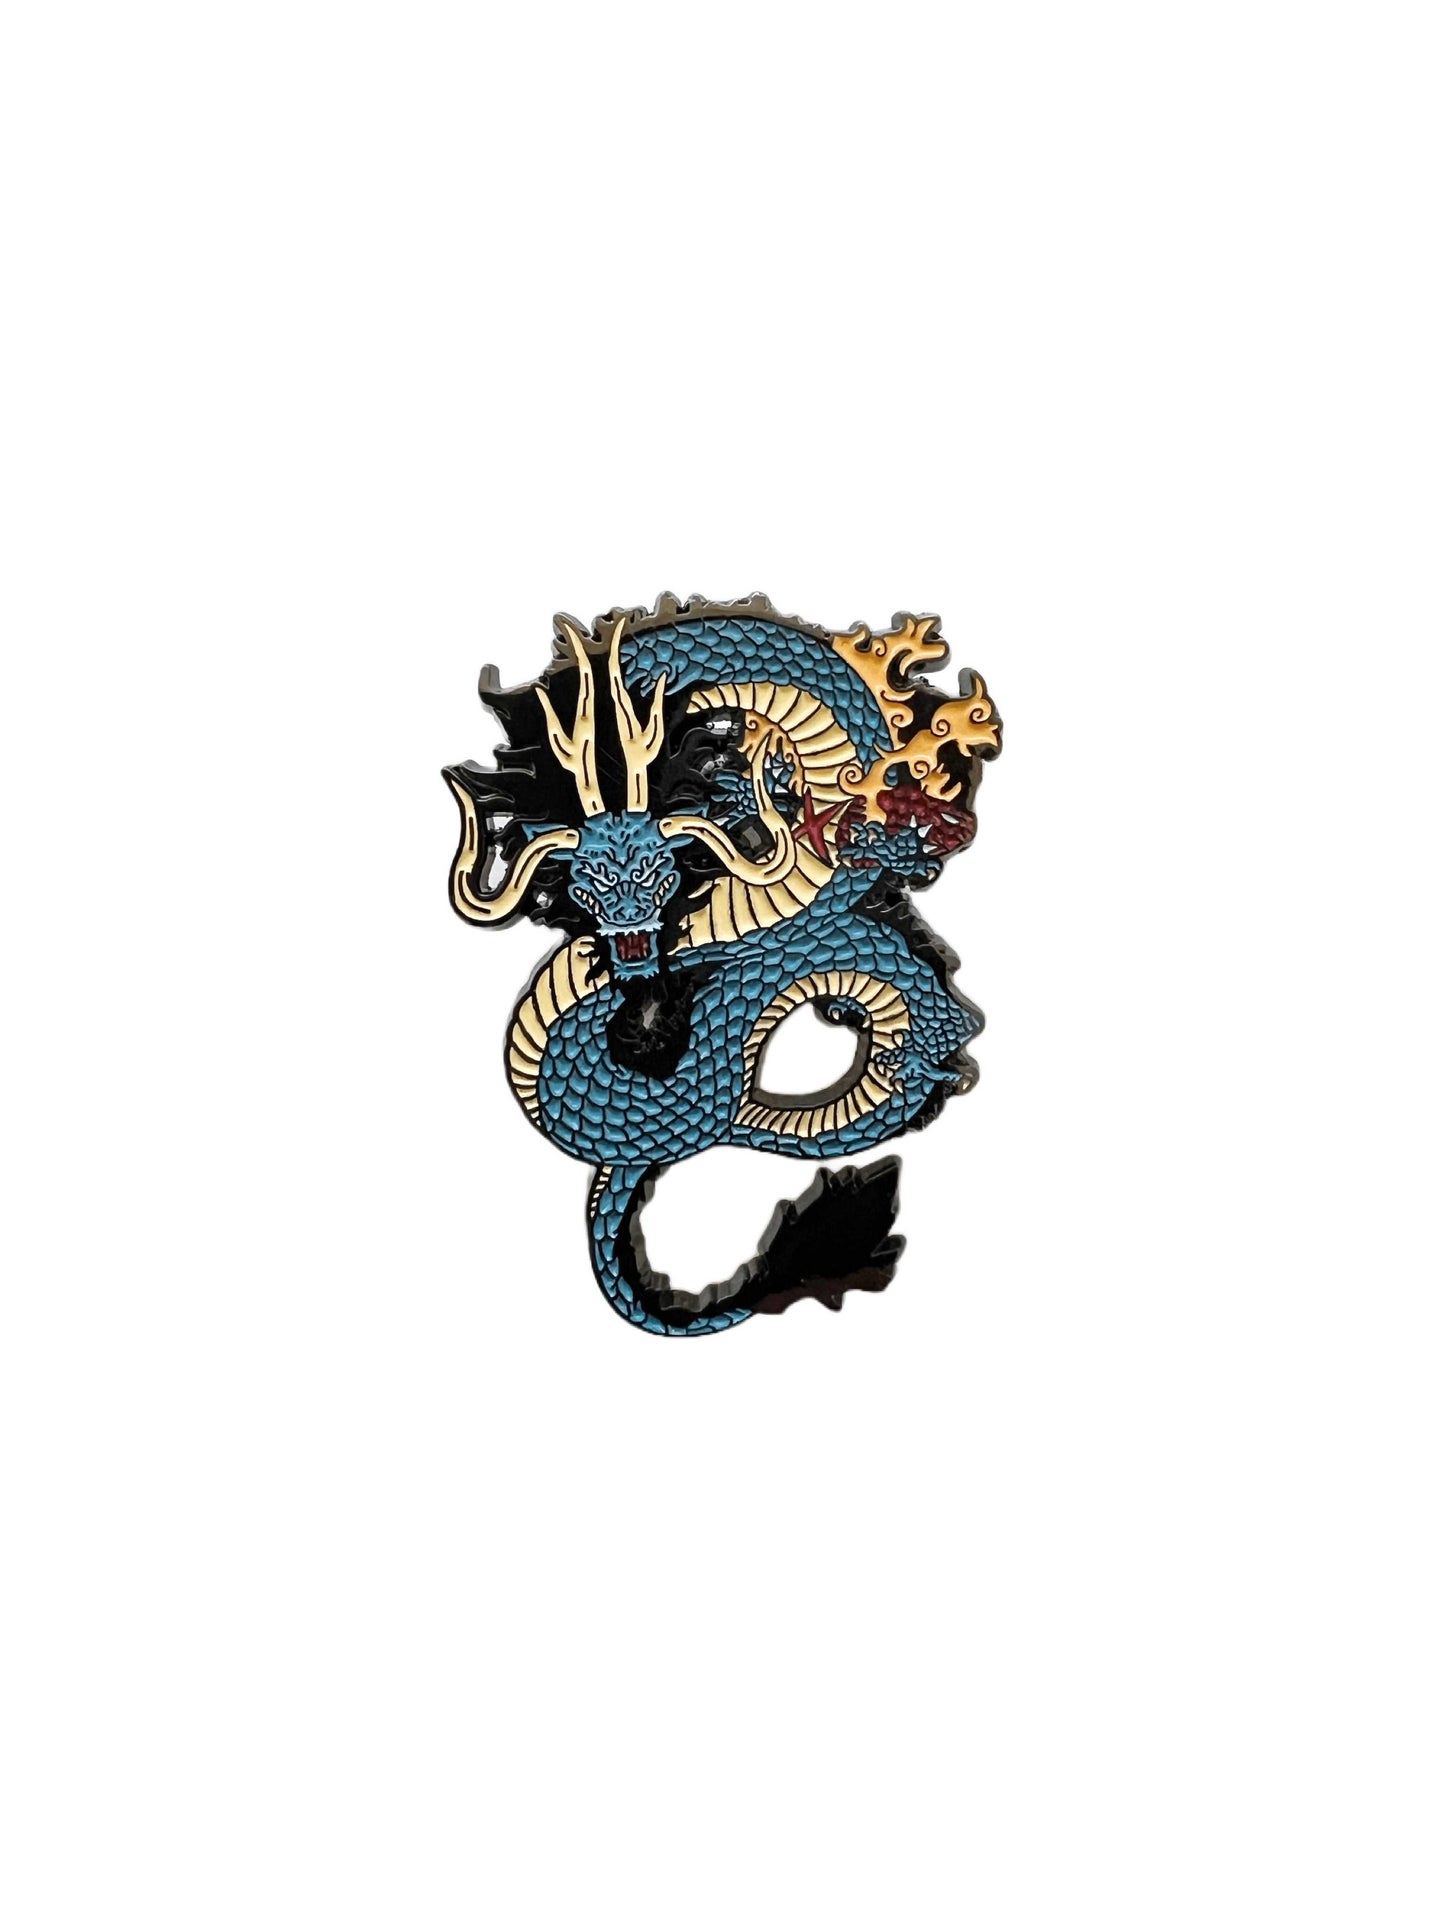 Anime One Piece Kaido Japan Enamel Metal Pin Badge Jewelry Accessory for Backpack Clothes Caps